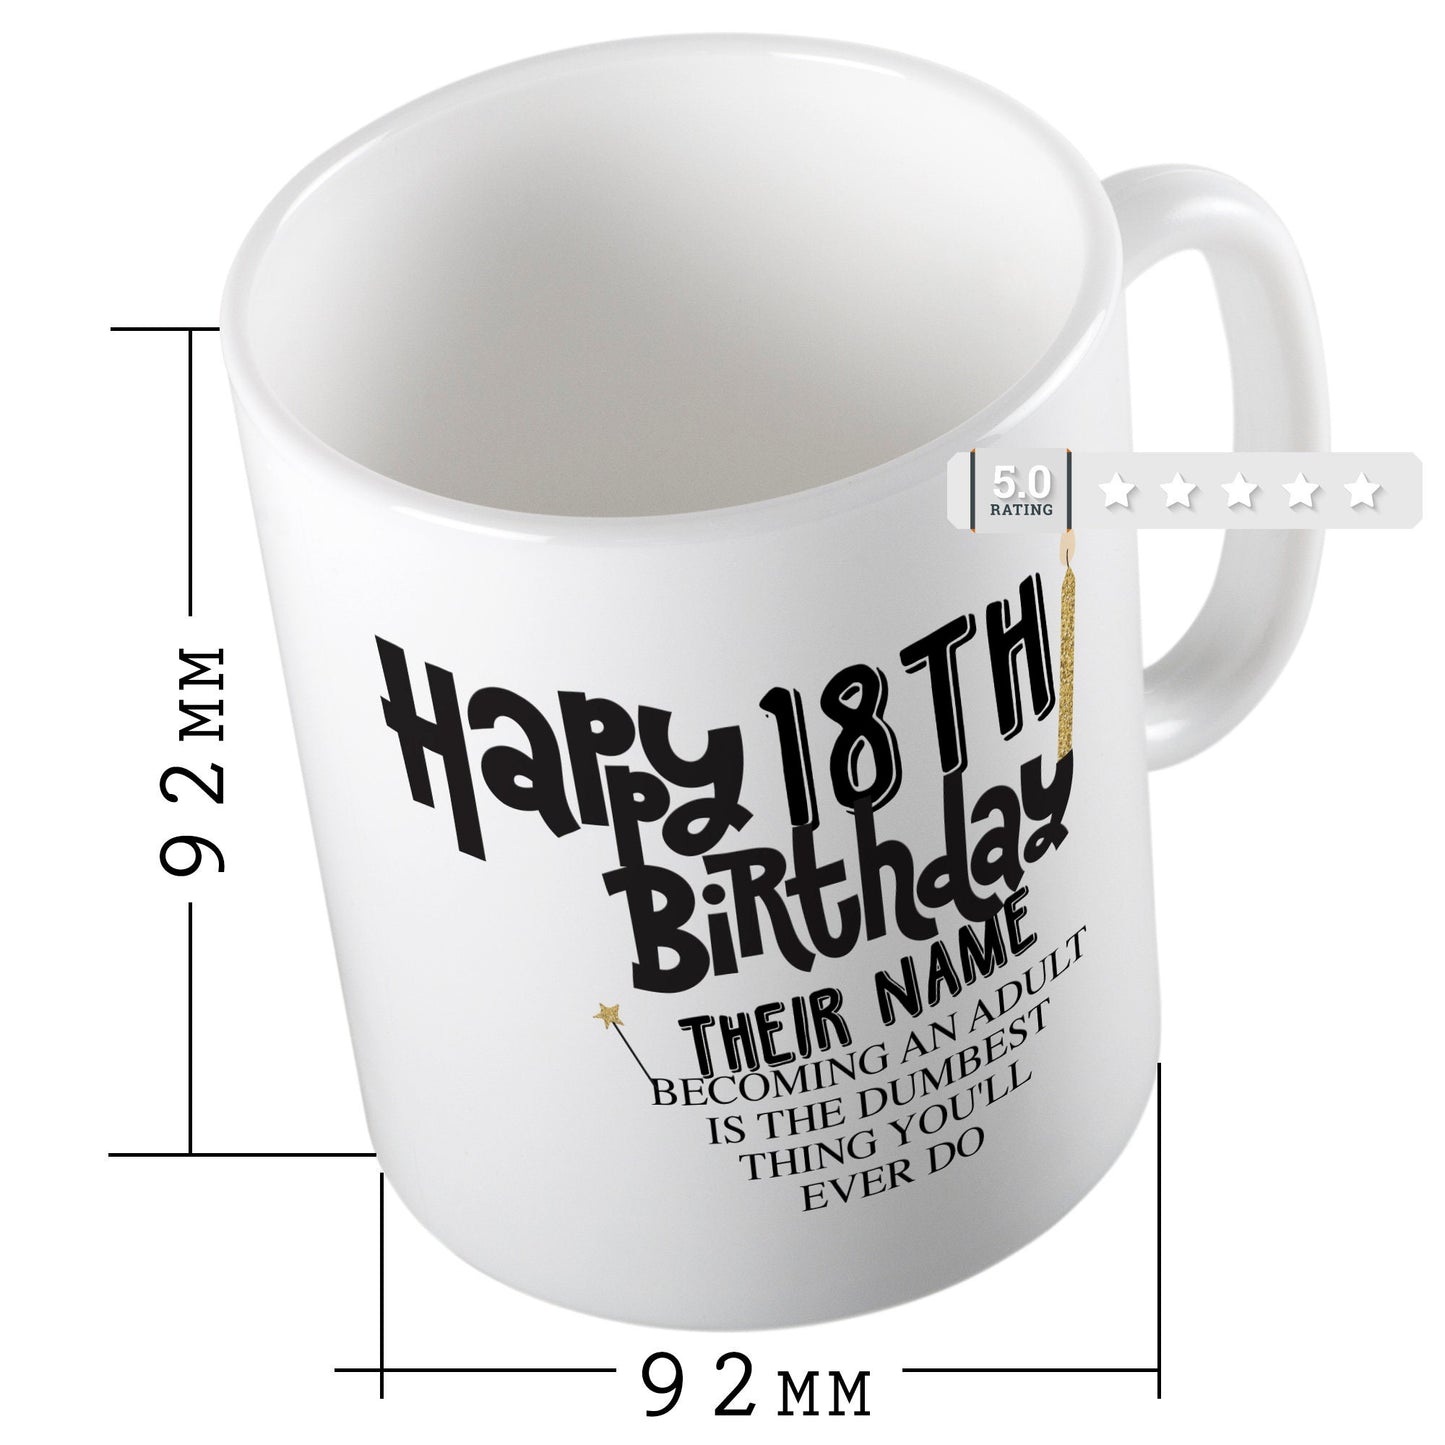 Happy 18 th Birthday Present (Personalised With Their Name) Growing Up Is The Dumbest Thing You'll Ever Do Mug Cup Happy 18th Birthday